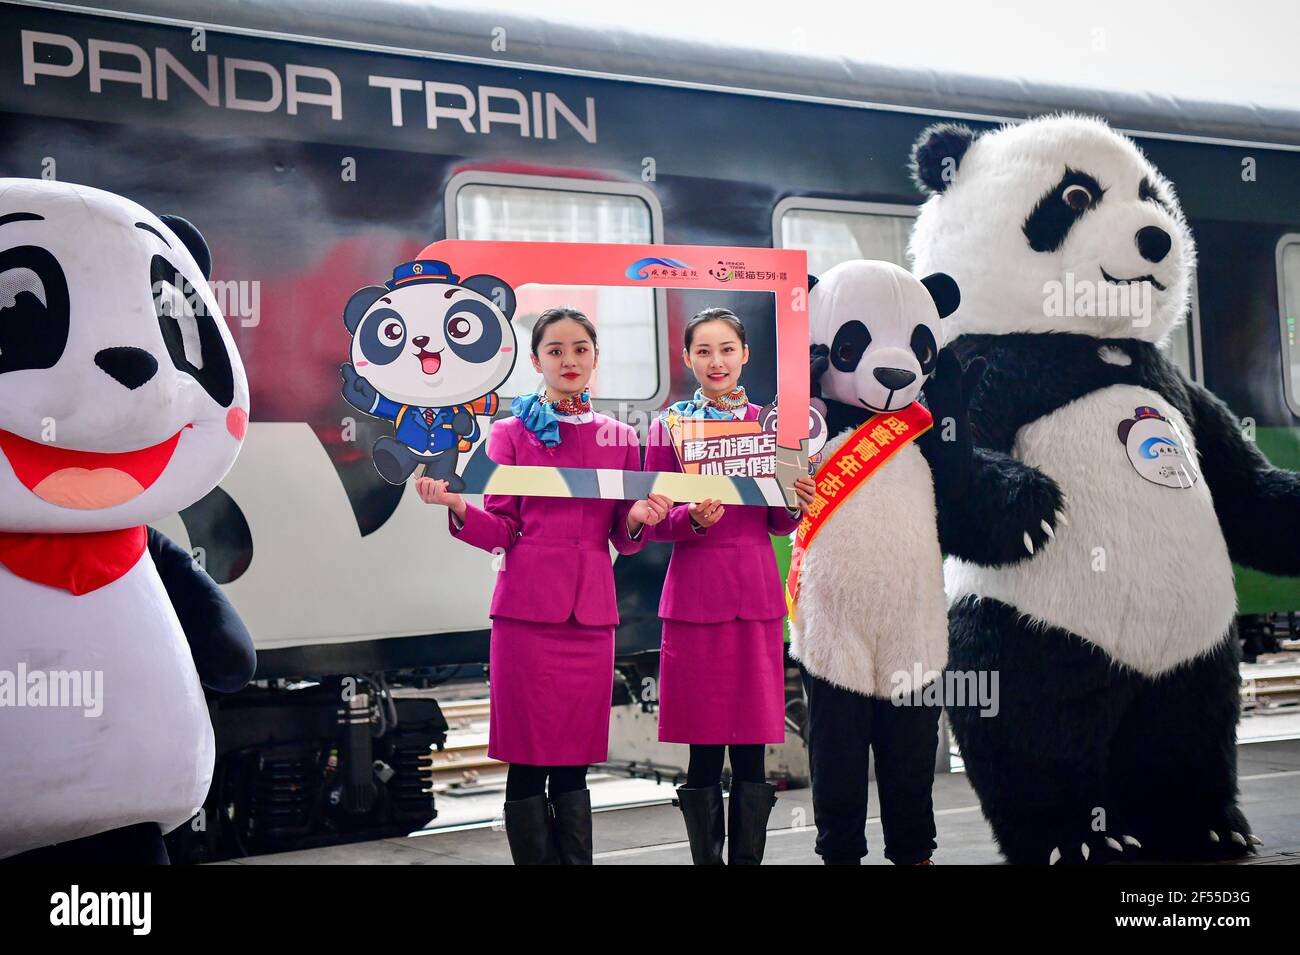 (210324) -- CHENGDU, March 24, 2021 (Xinhua) -- Stewardesses pose in front of the 'panda train' in southwest China's Sichuan Province, March 24, 2021. China's first panda-themed tourist train 'panda train' started trial run in Sichuan on Wednesday and will start operation on March 28. Transformed from a normal train, the 'panda train' features upgraded standards inclucing 5G wireless network coverage, music and video entertainment system, restaurant and bar, chess and card room and private toilets with constant temperature shower in sleeping carriages. The 'panda train' will serve on fixe Stock Photo